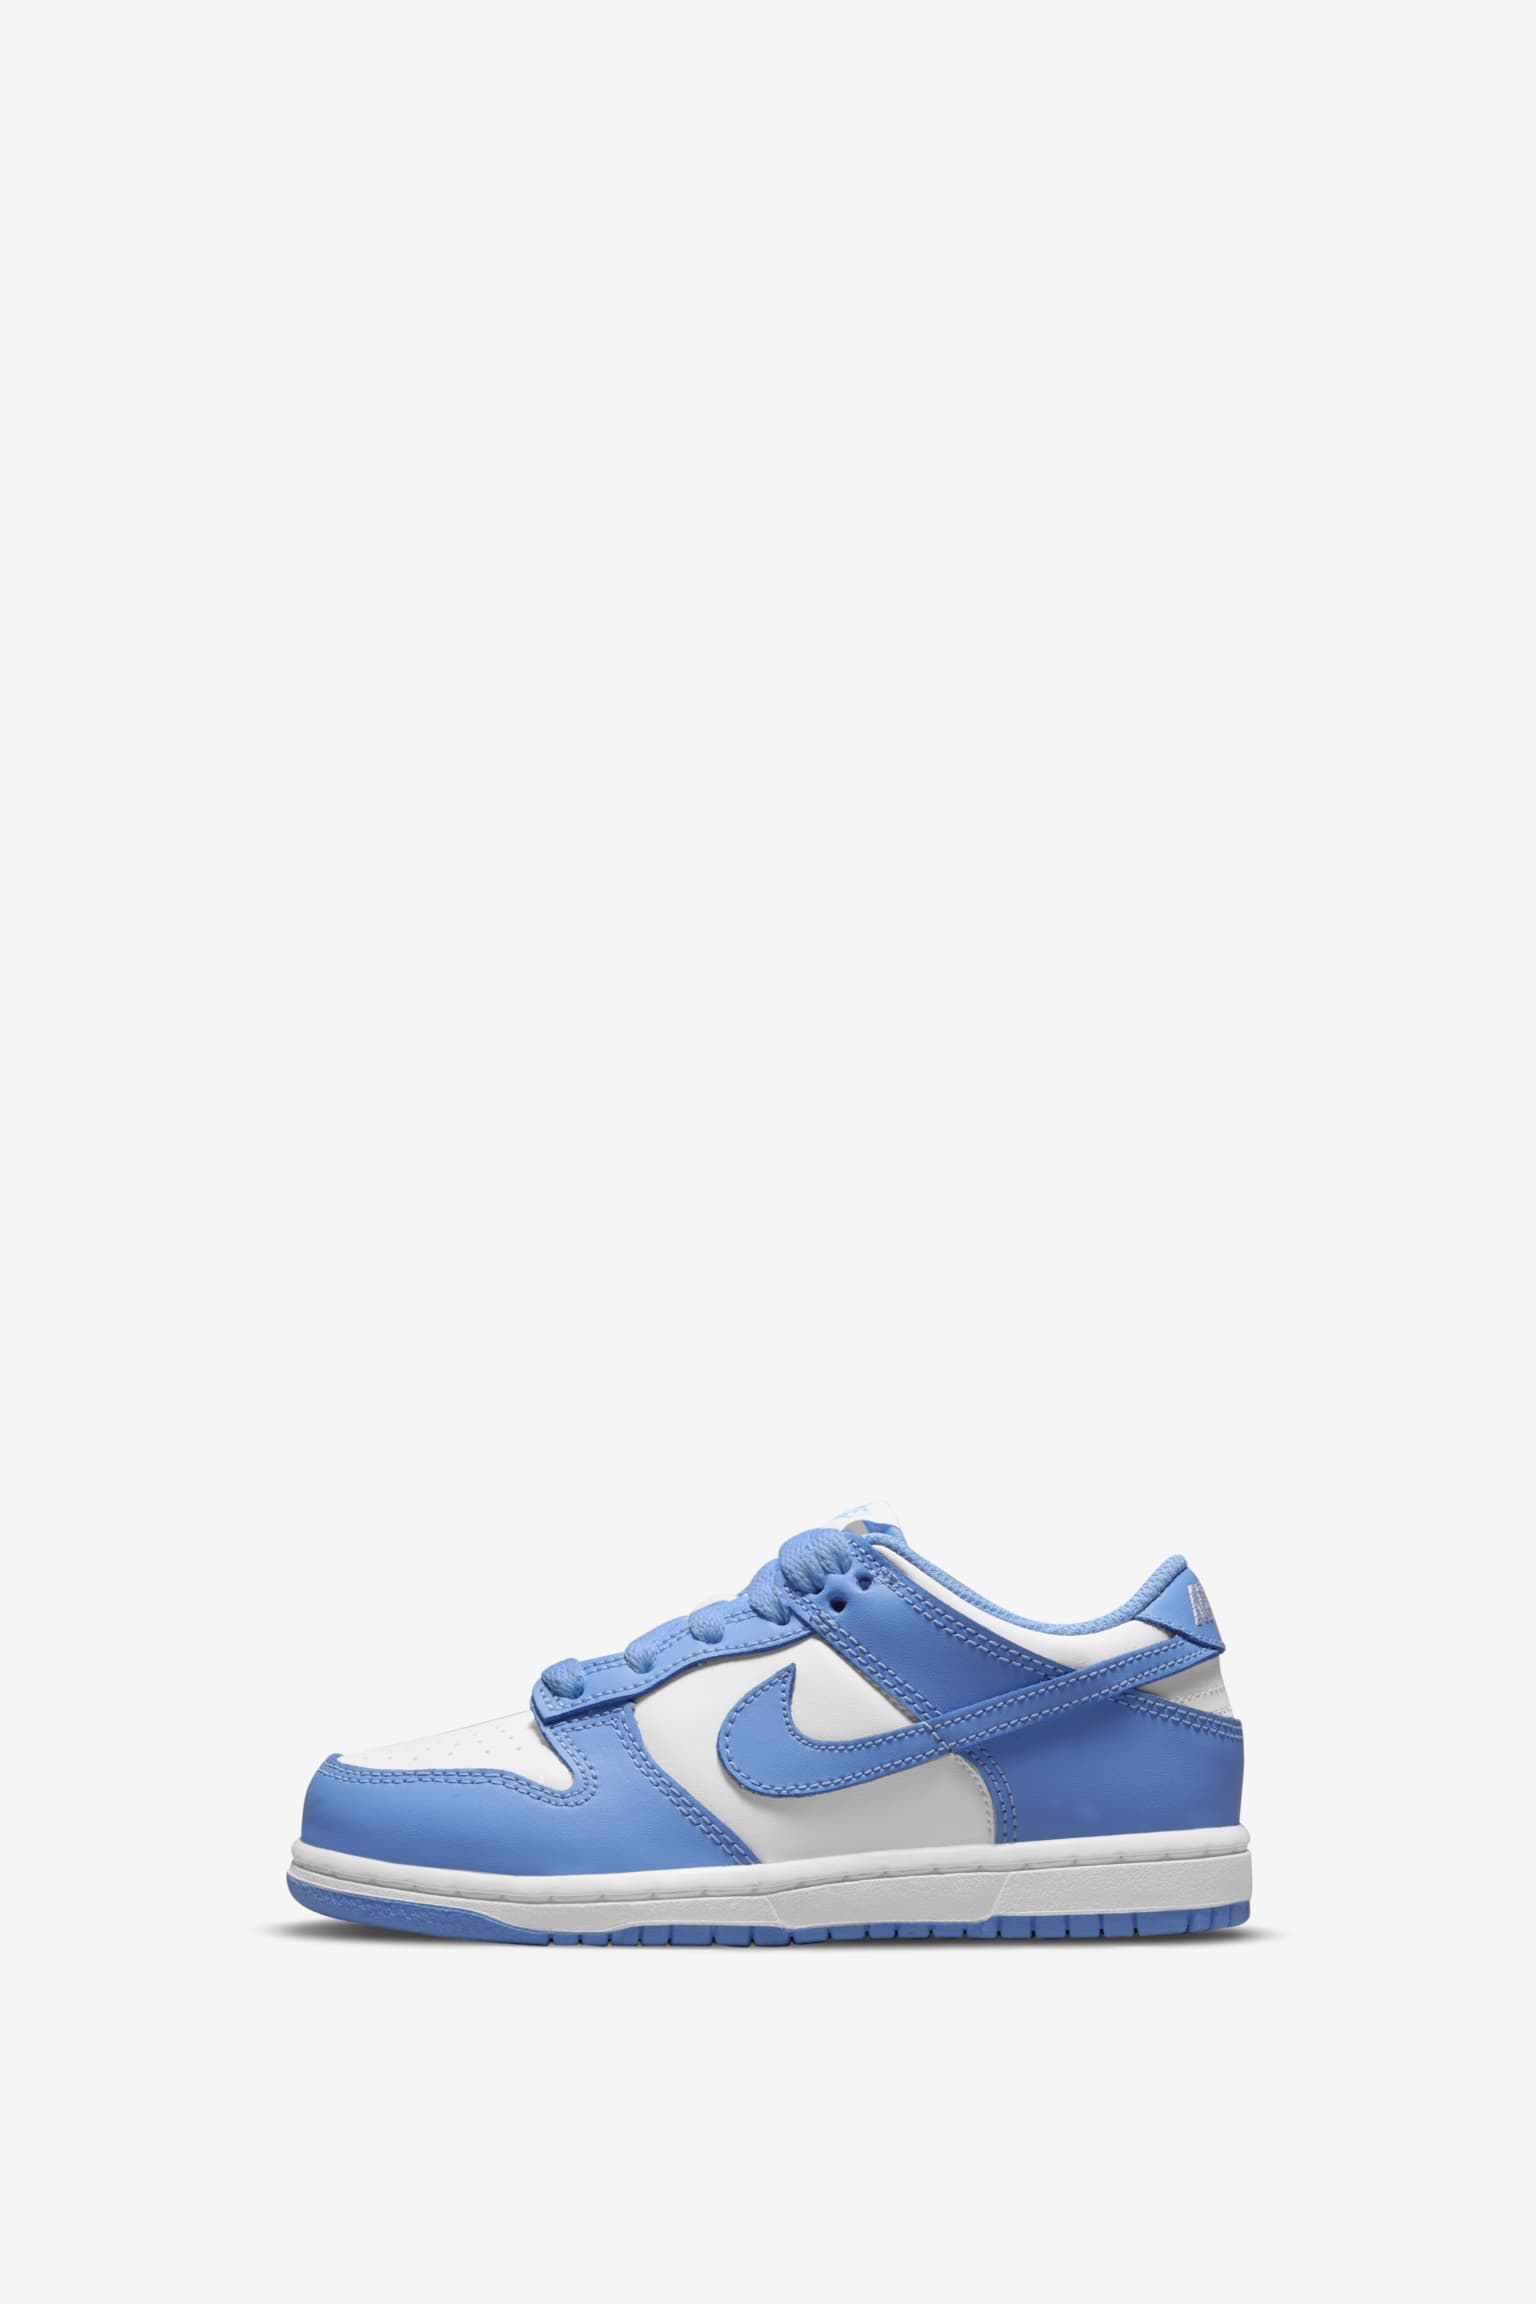 Nike Dunk Sb Low Shoes Men Dunks Sneakers White Black Coast Varsity Green  University Blue Syracuse Court Purple Women Outdoor Sports Fashion Trainers  36 45 From 60,81 €